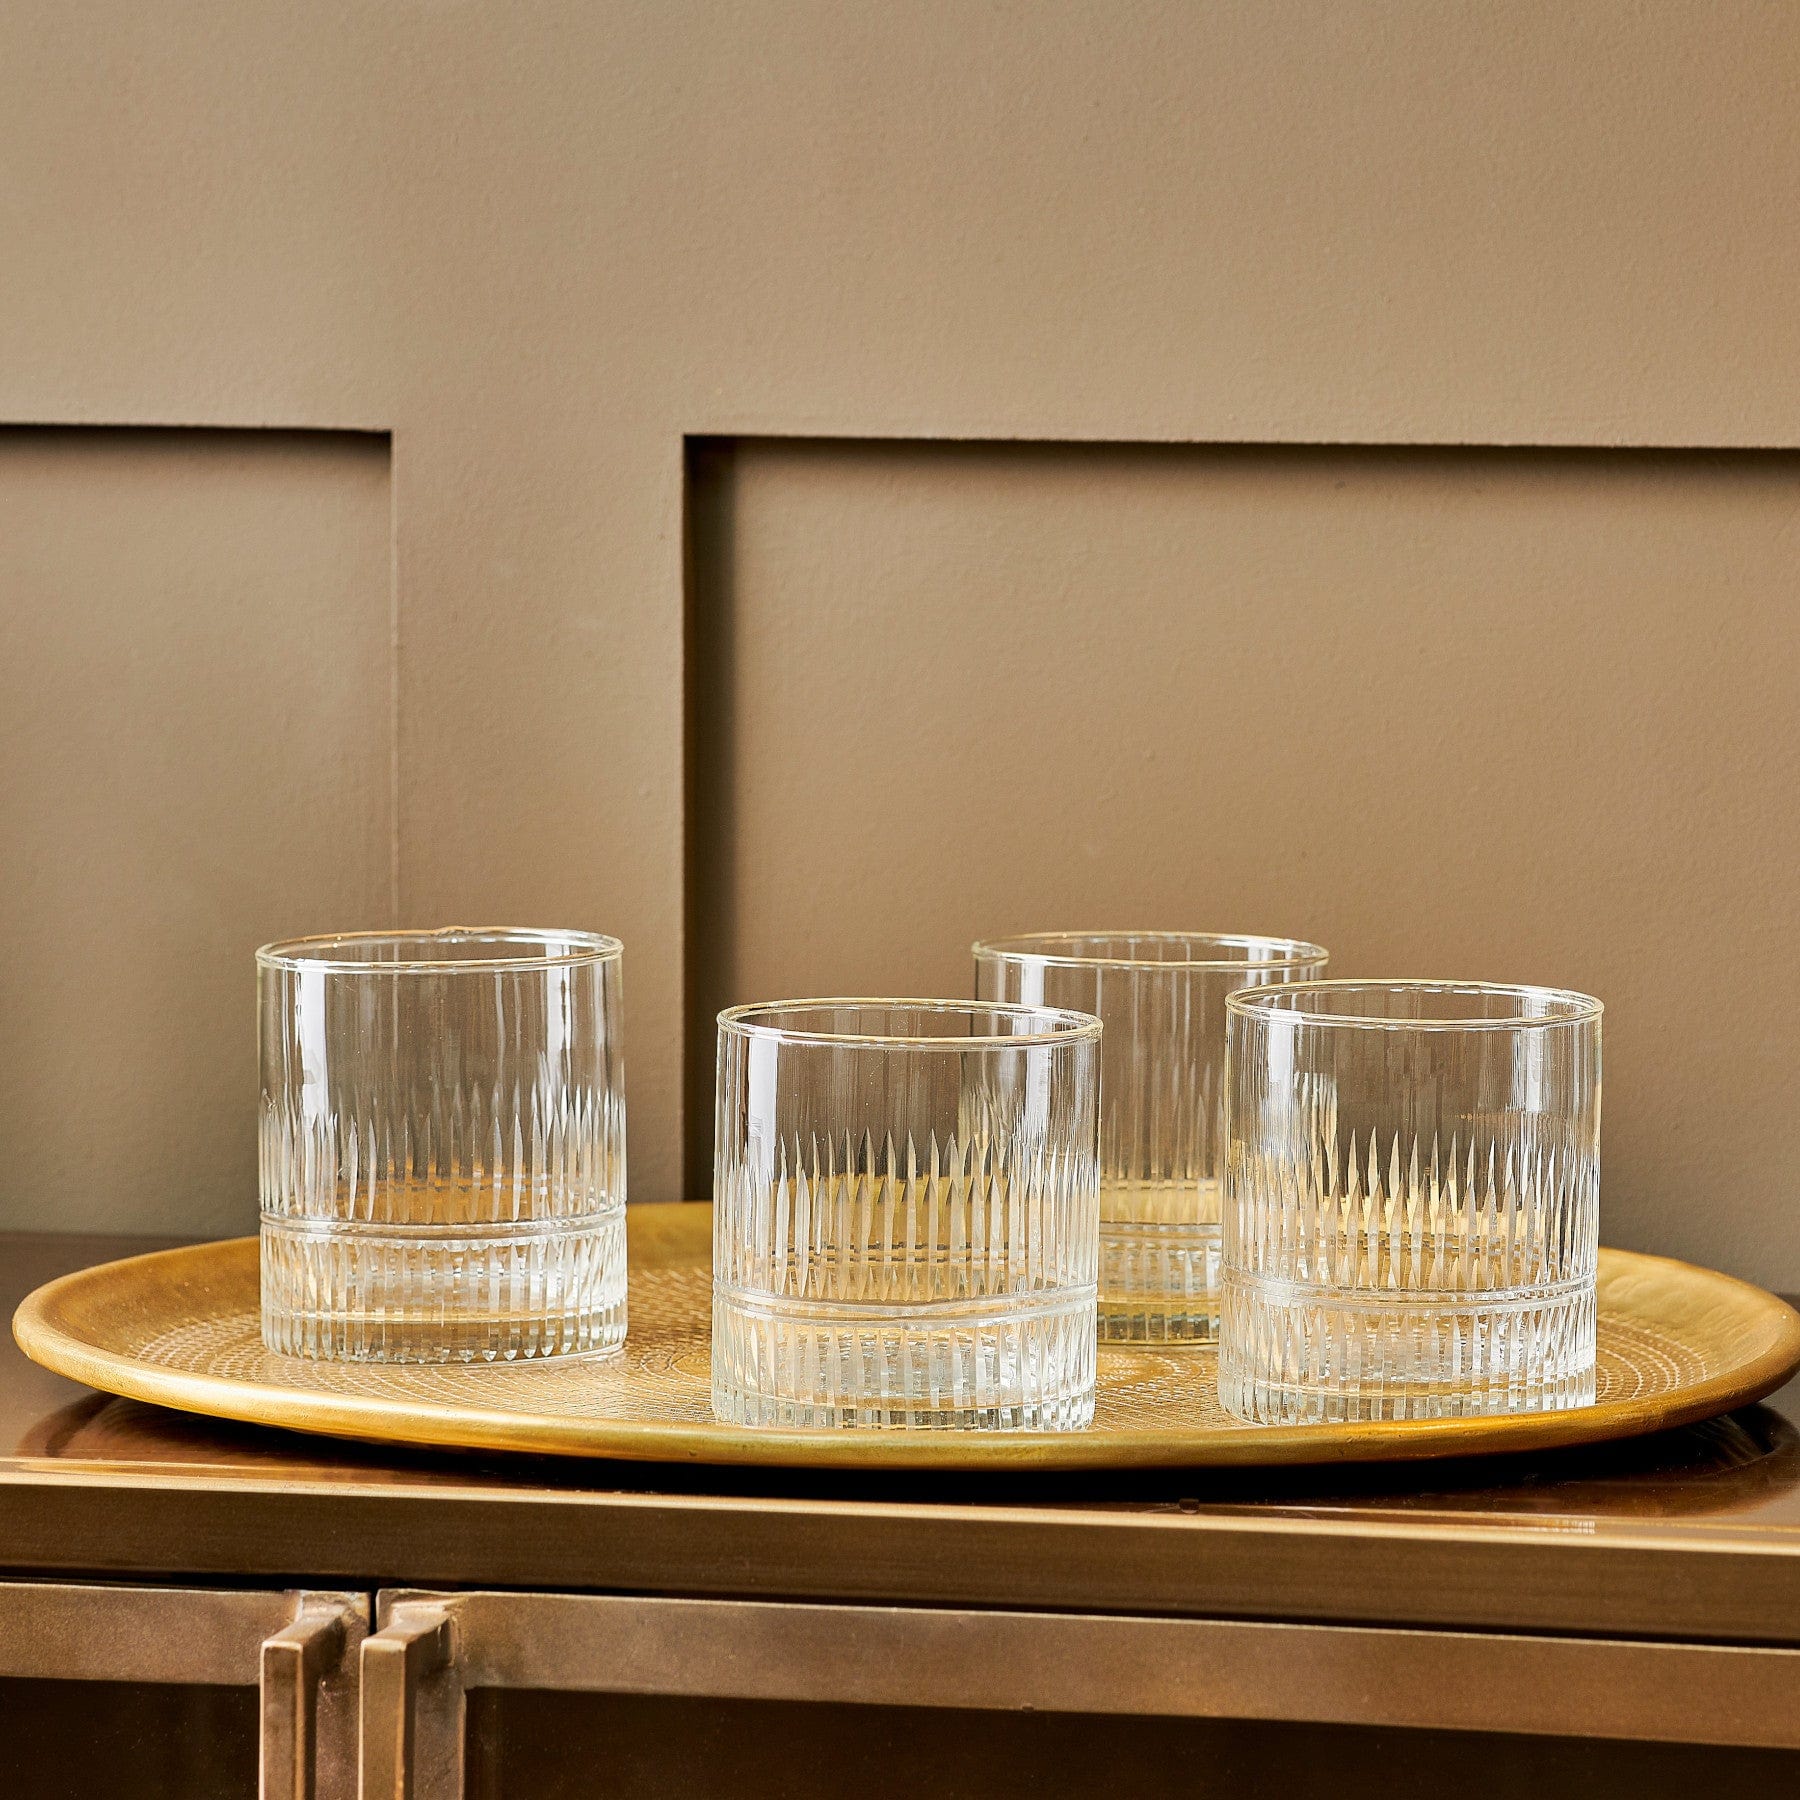 Elegant crystal whiskey glasses set on a golden tray on wooden table, home bar accessories, luxury glassware, interior design details